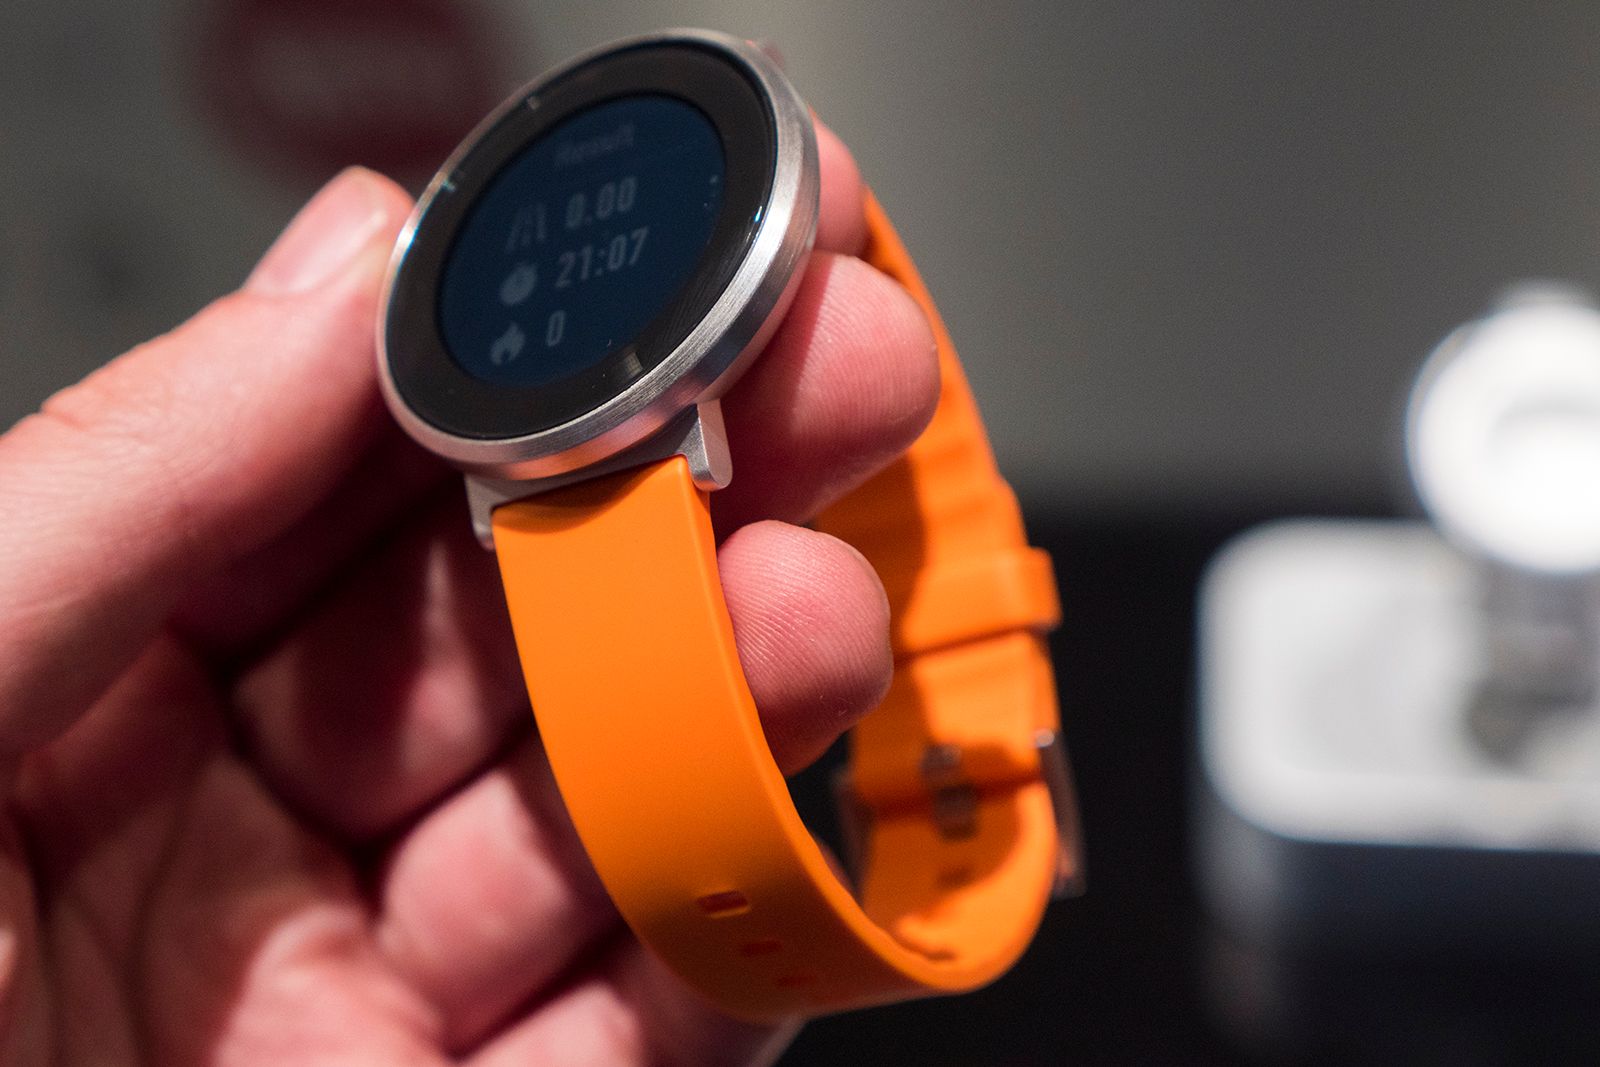 huawei fit delivers heart rate monitor in a watch style fitness tracker image 3